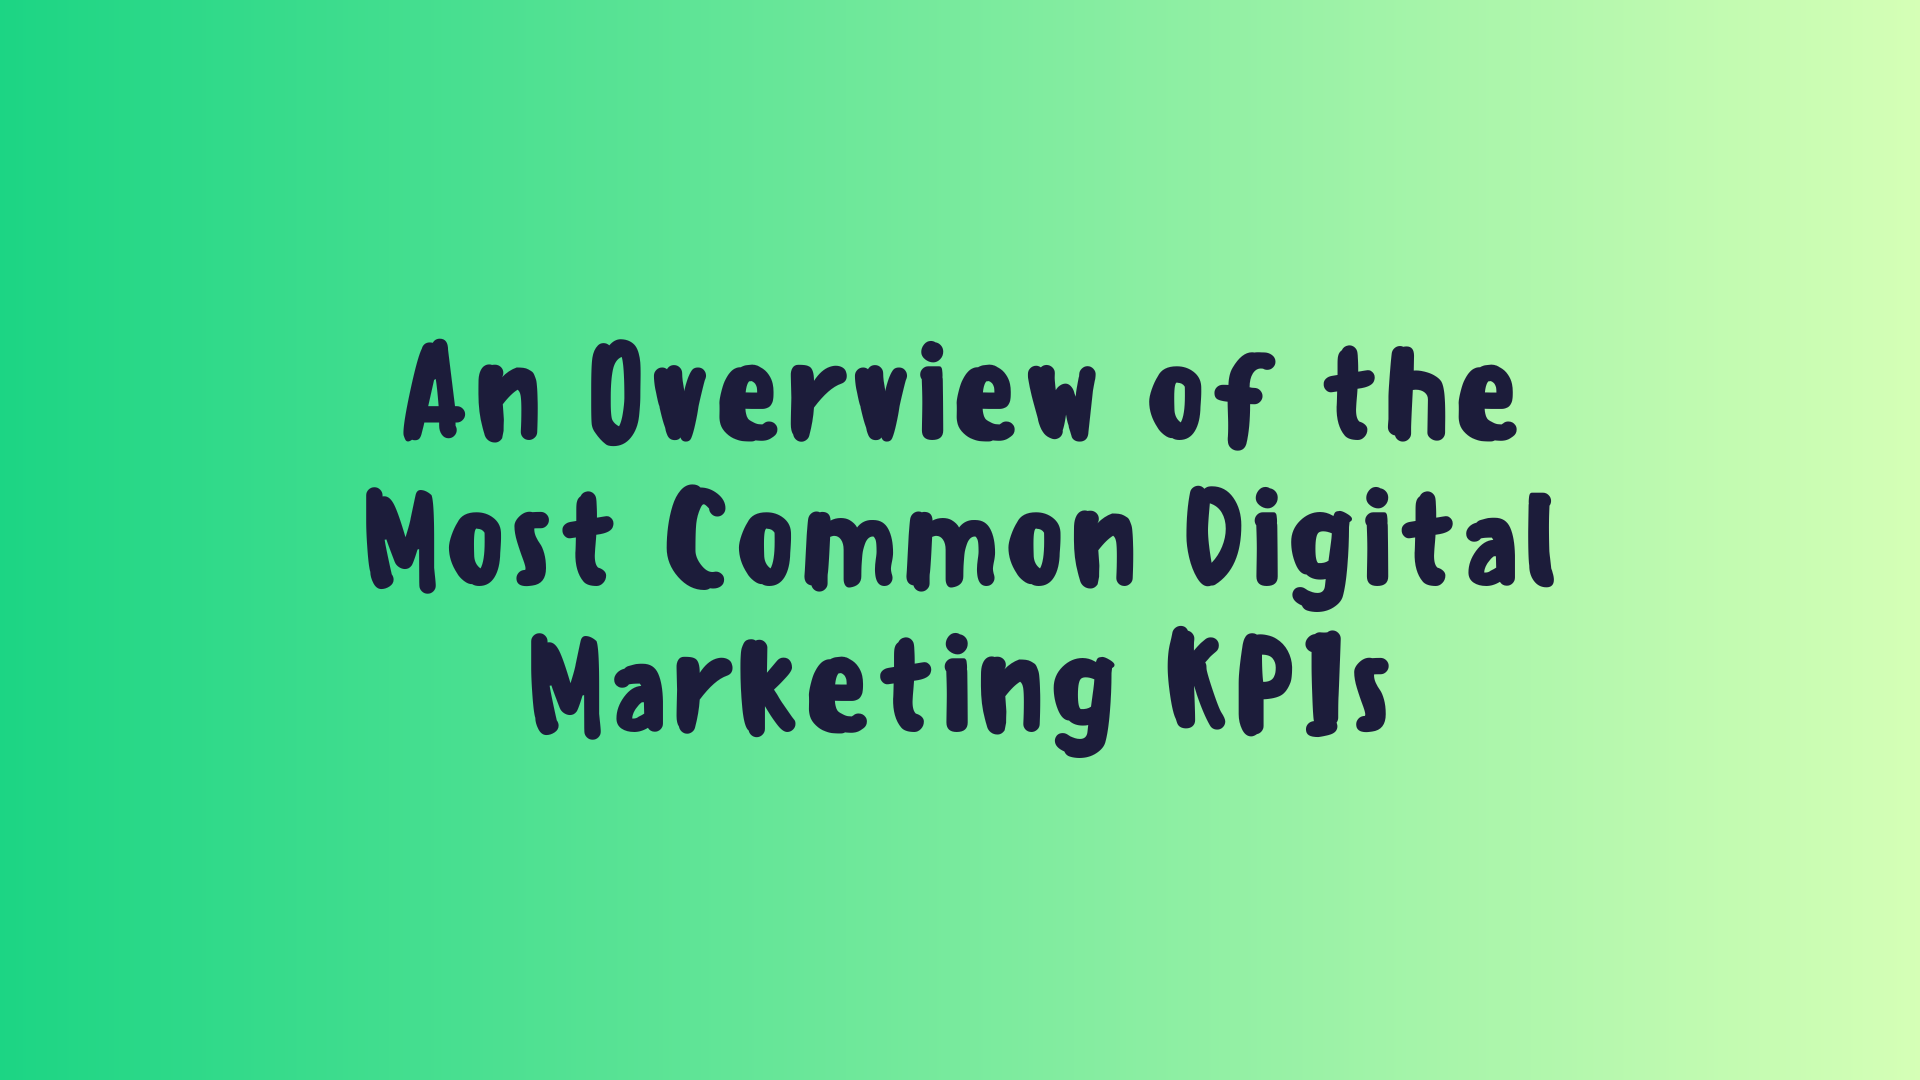 An Overview of the Most Common Digital Marketing KPIs